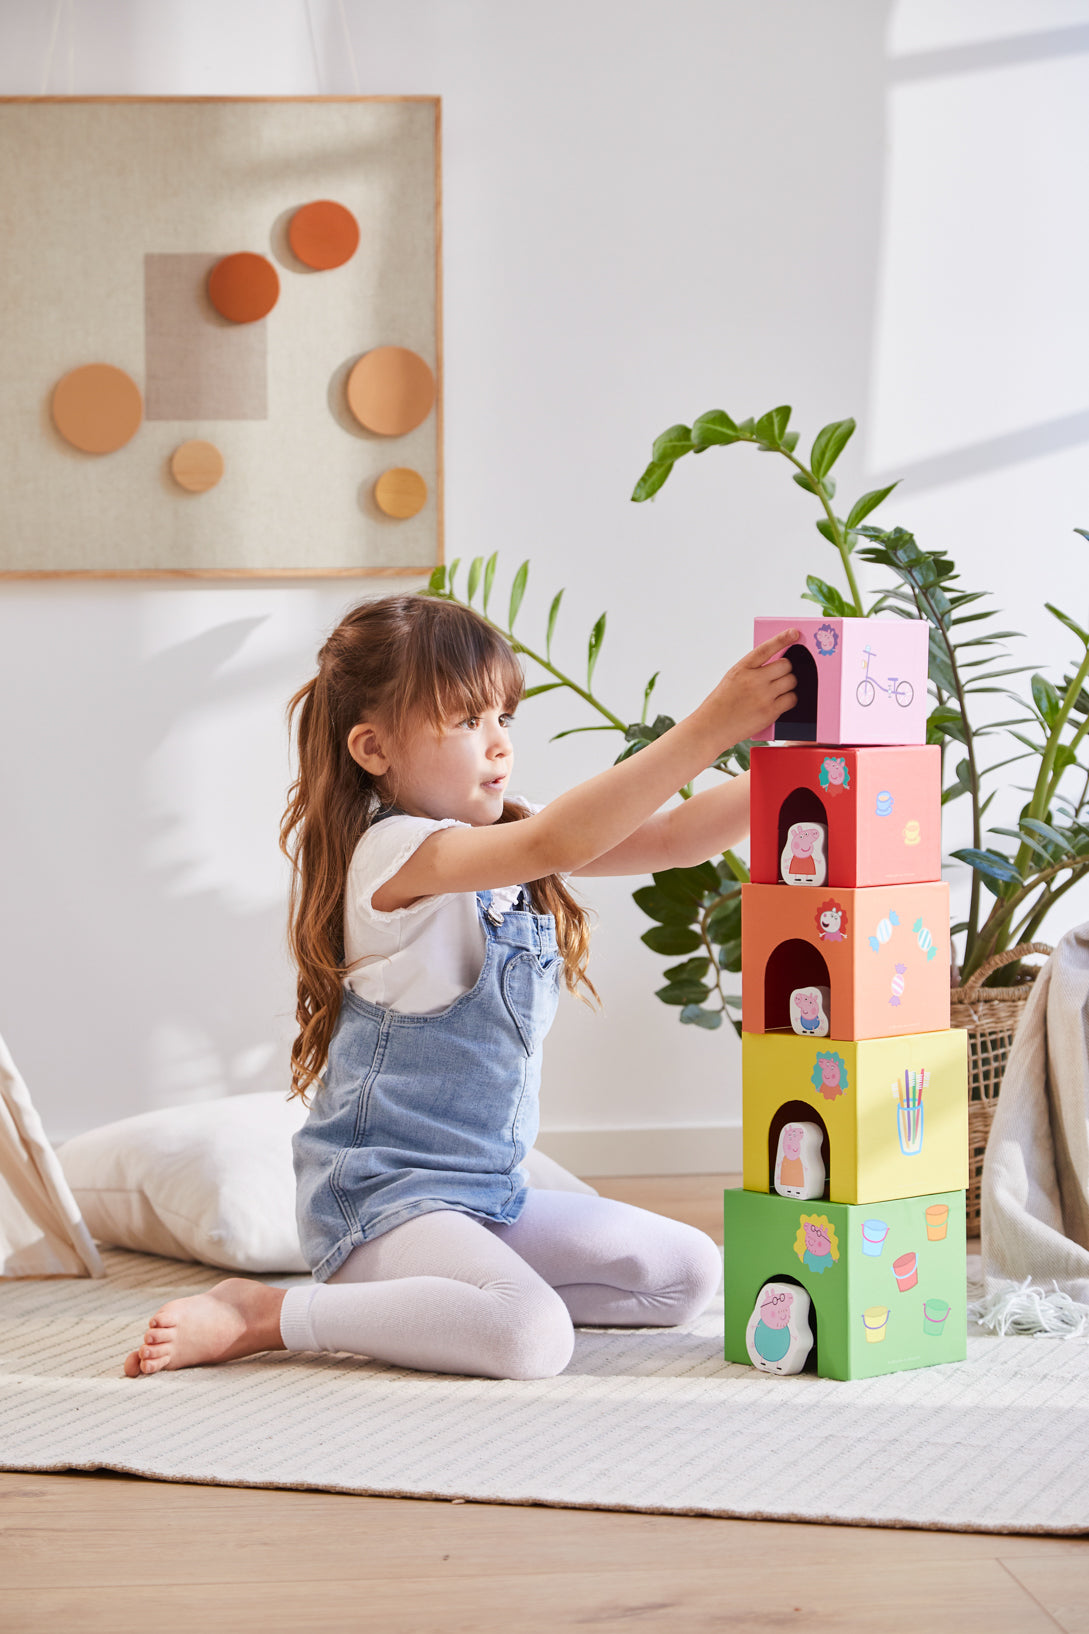 Peppa Pig Stacking Cubes with figurines